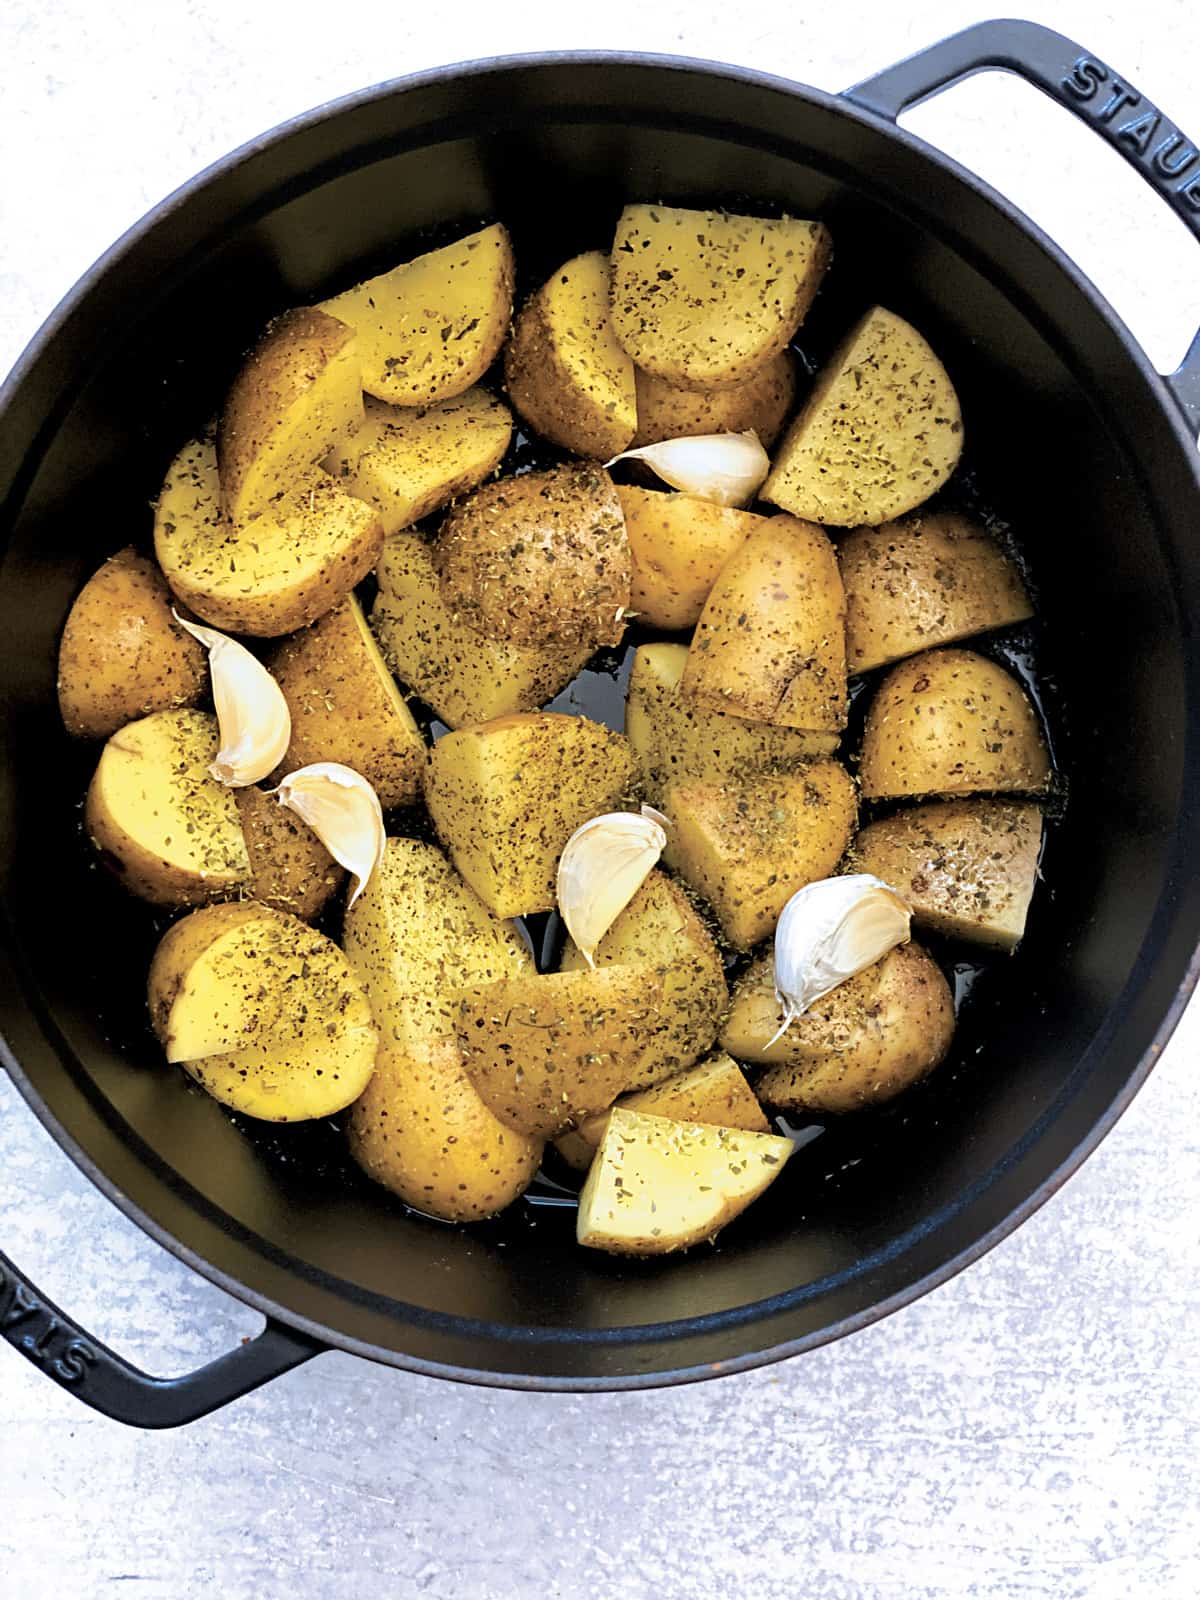 Cut up potatoes in a black pot, seasoned with olive oil and dry oregano.